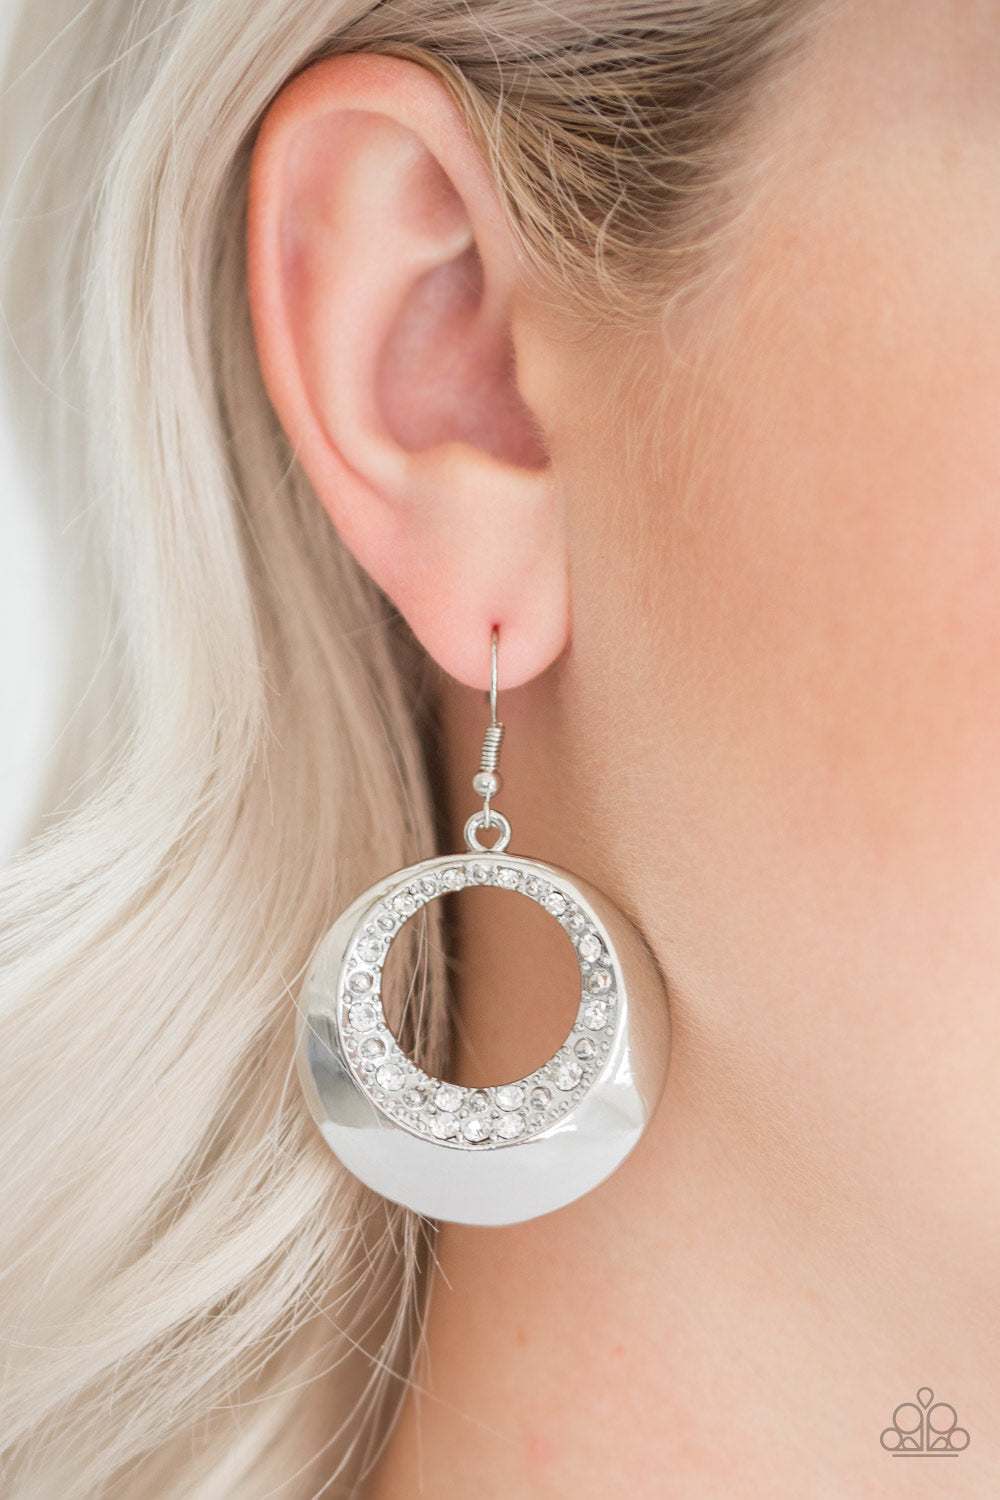 Ringed In Refinement White Earrings Paparazzi Accessories